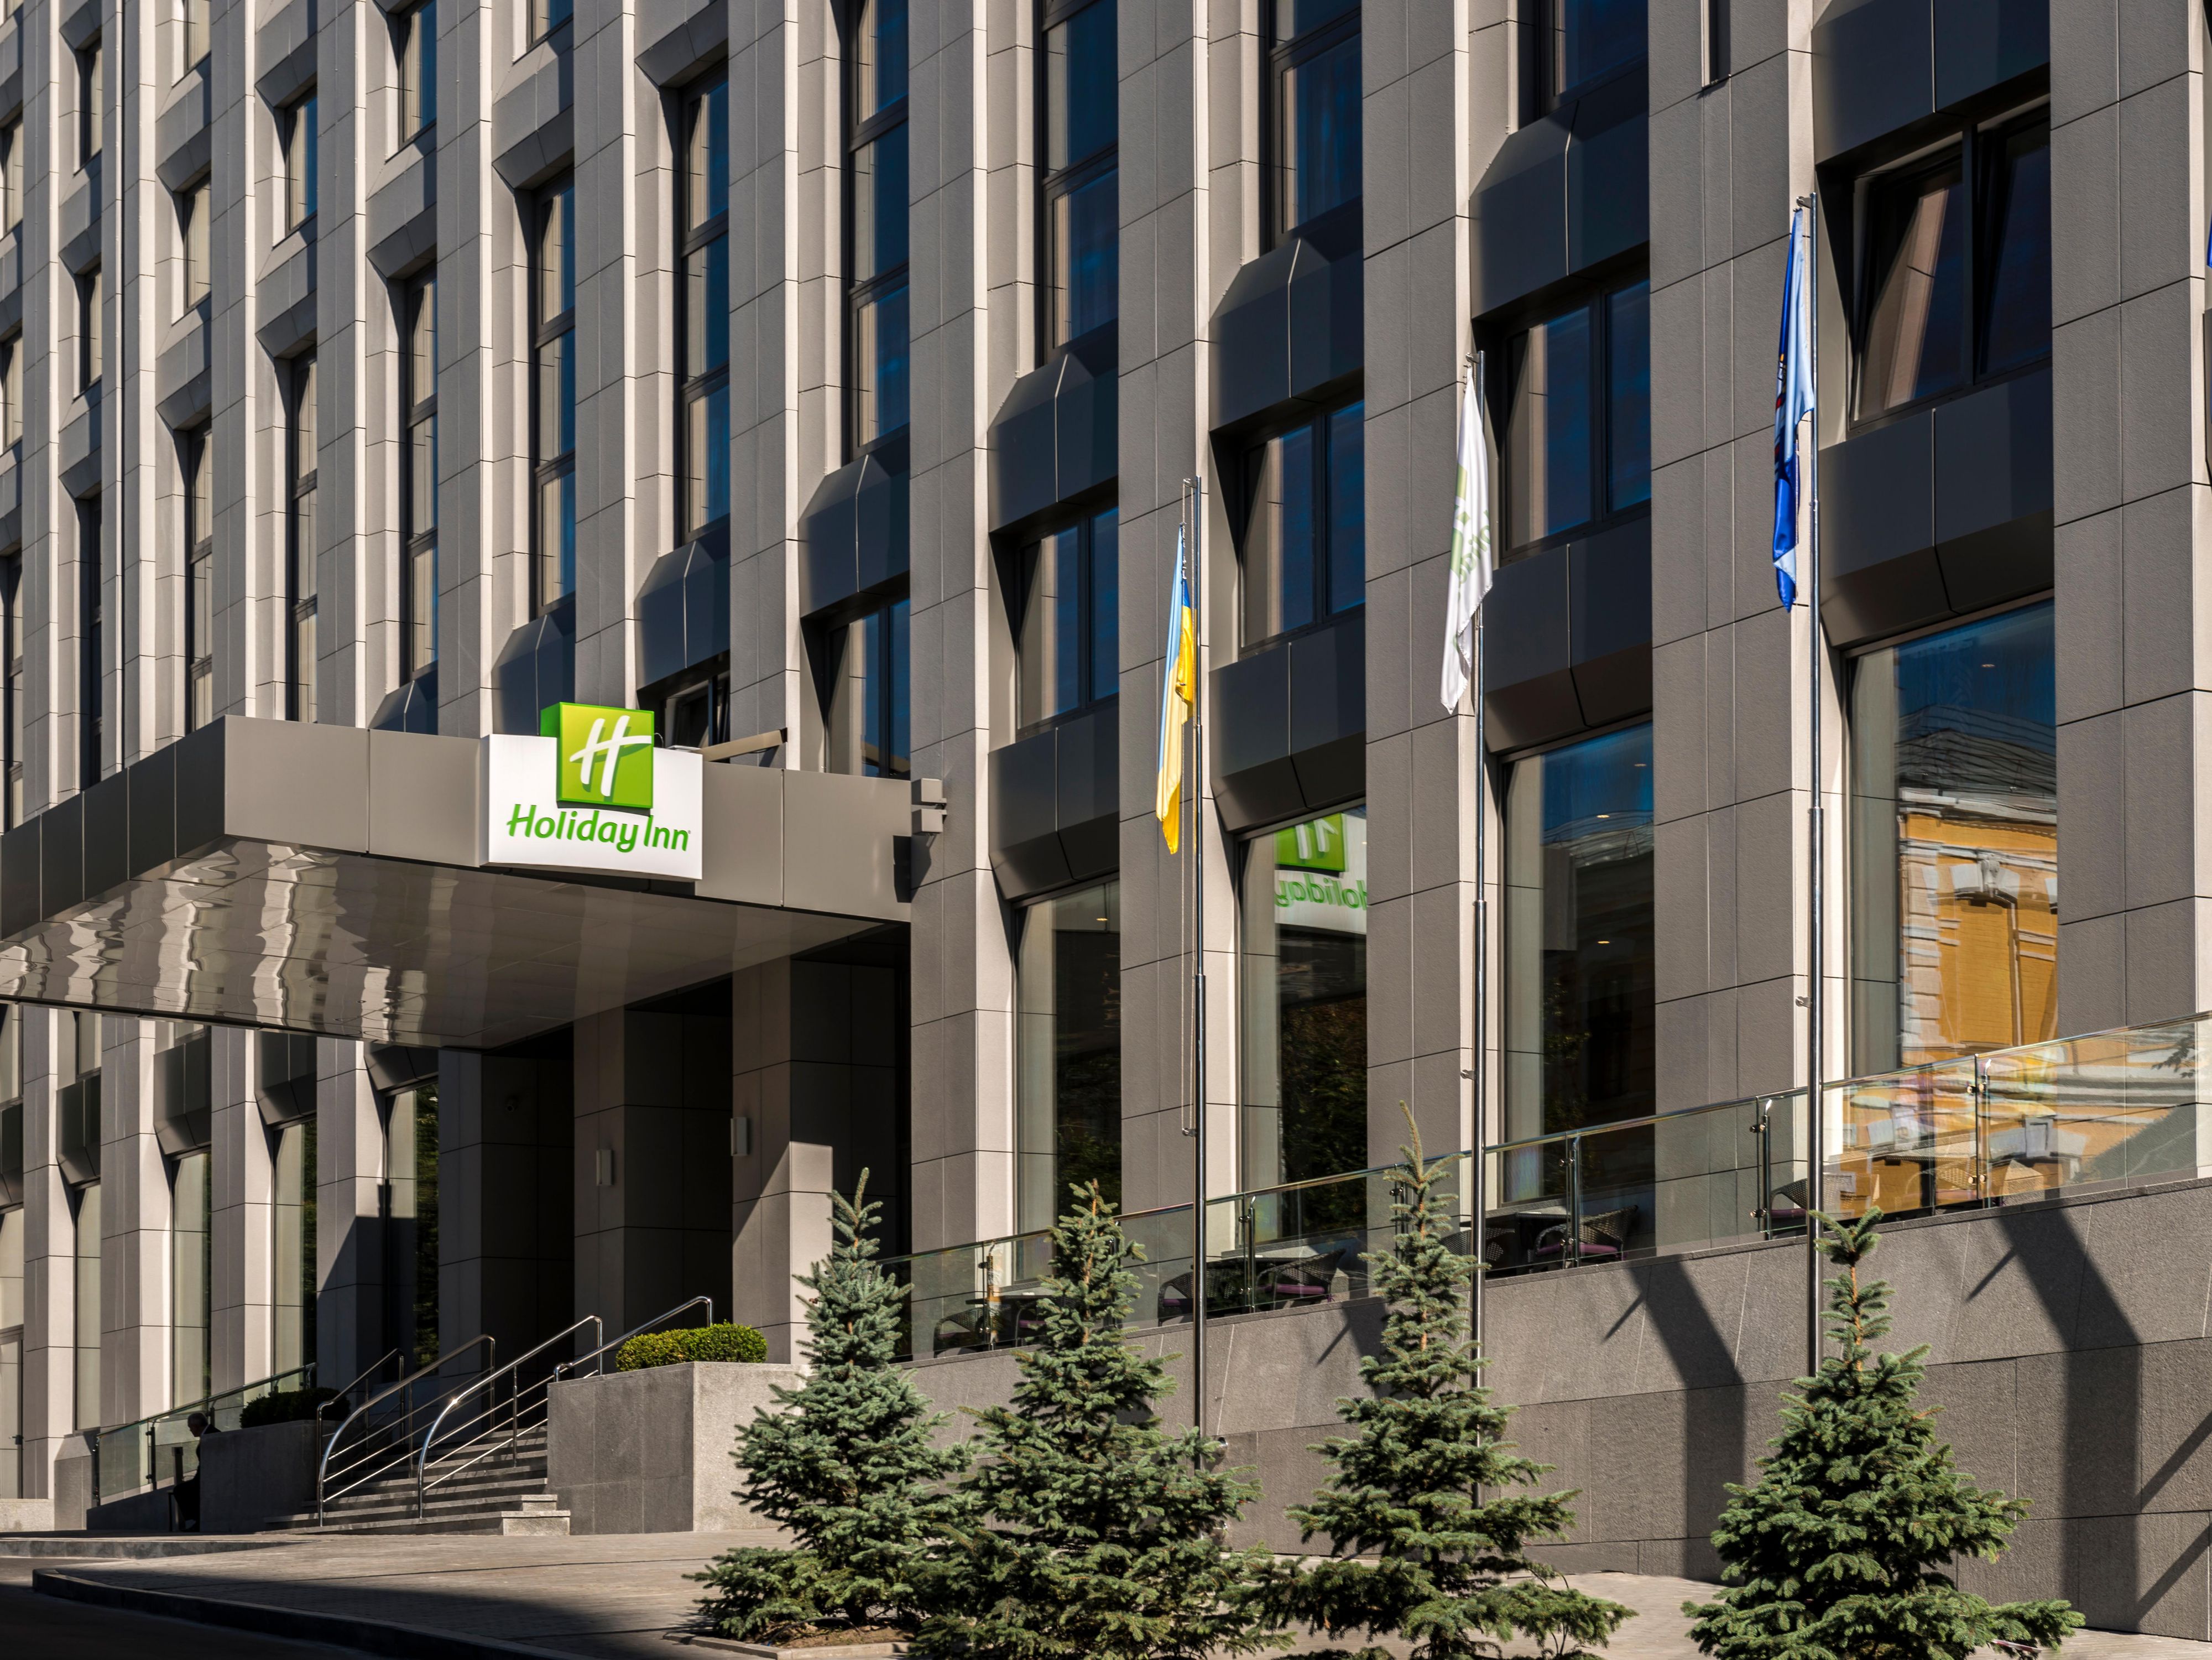 Whether you need to go on a business meeting or explore sightseeing spots – the location of Holiday Inn Kyiv offers easy access wherever you need to get. Tips on which places to visit and a city map are available at the Reception desk.